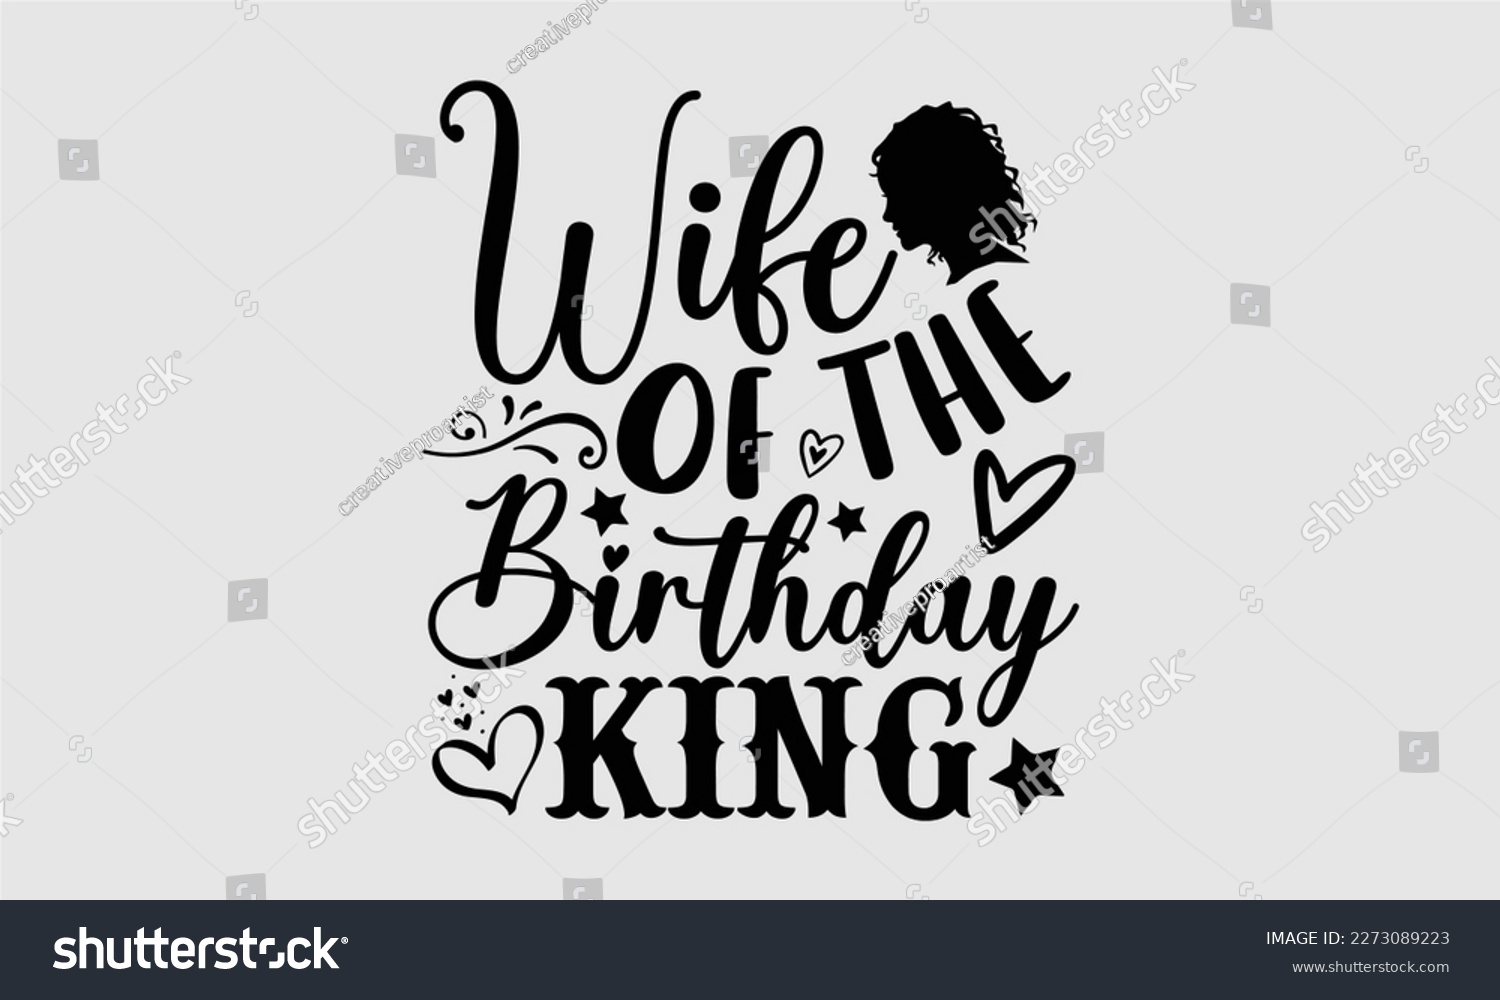 SVG of 
Wife of the birthday king- Wife T- shirt design, Hand drawn vintage illustration with hand-lettering and decoration elements, greeting card template with typography text, eps, svg Files for Cuttin svg